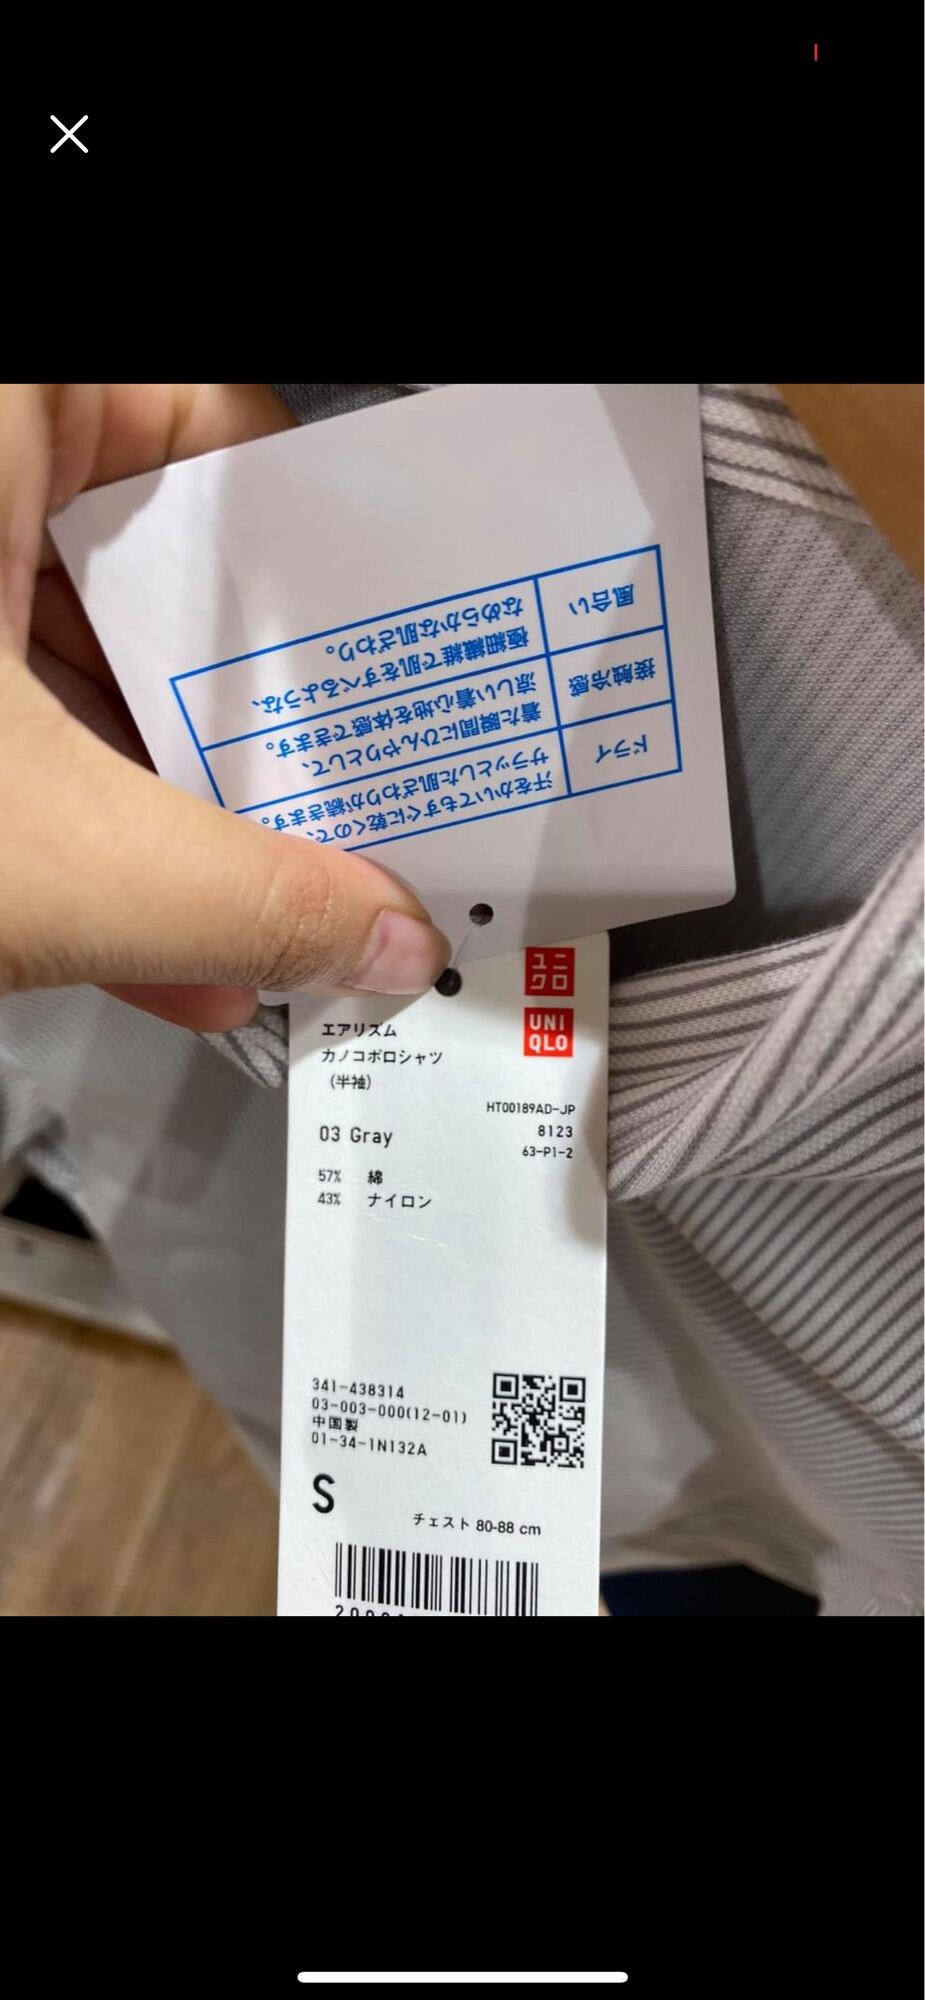 Uniqlos washable quickdrying masks launched in Japan long queue formed   Vietnam Times